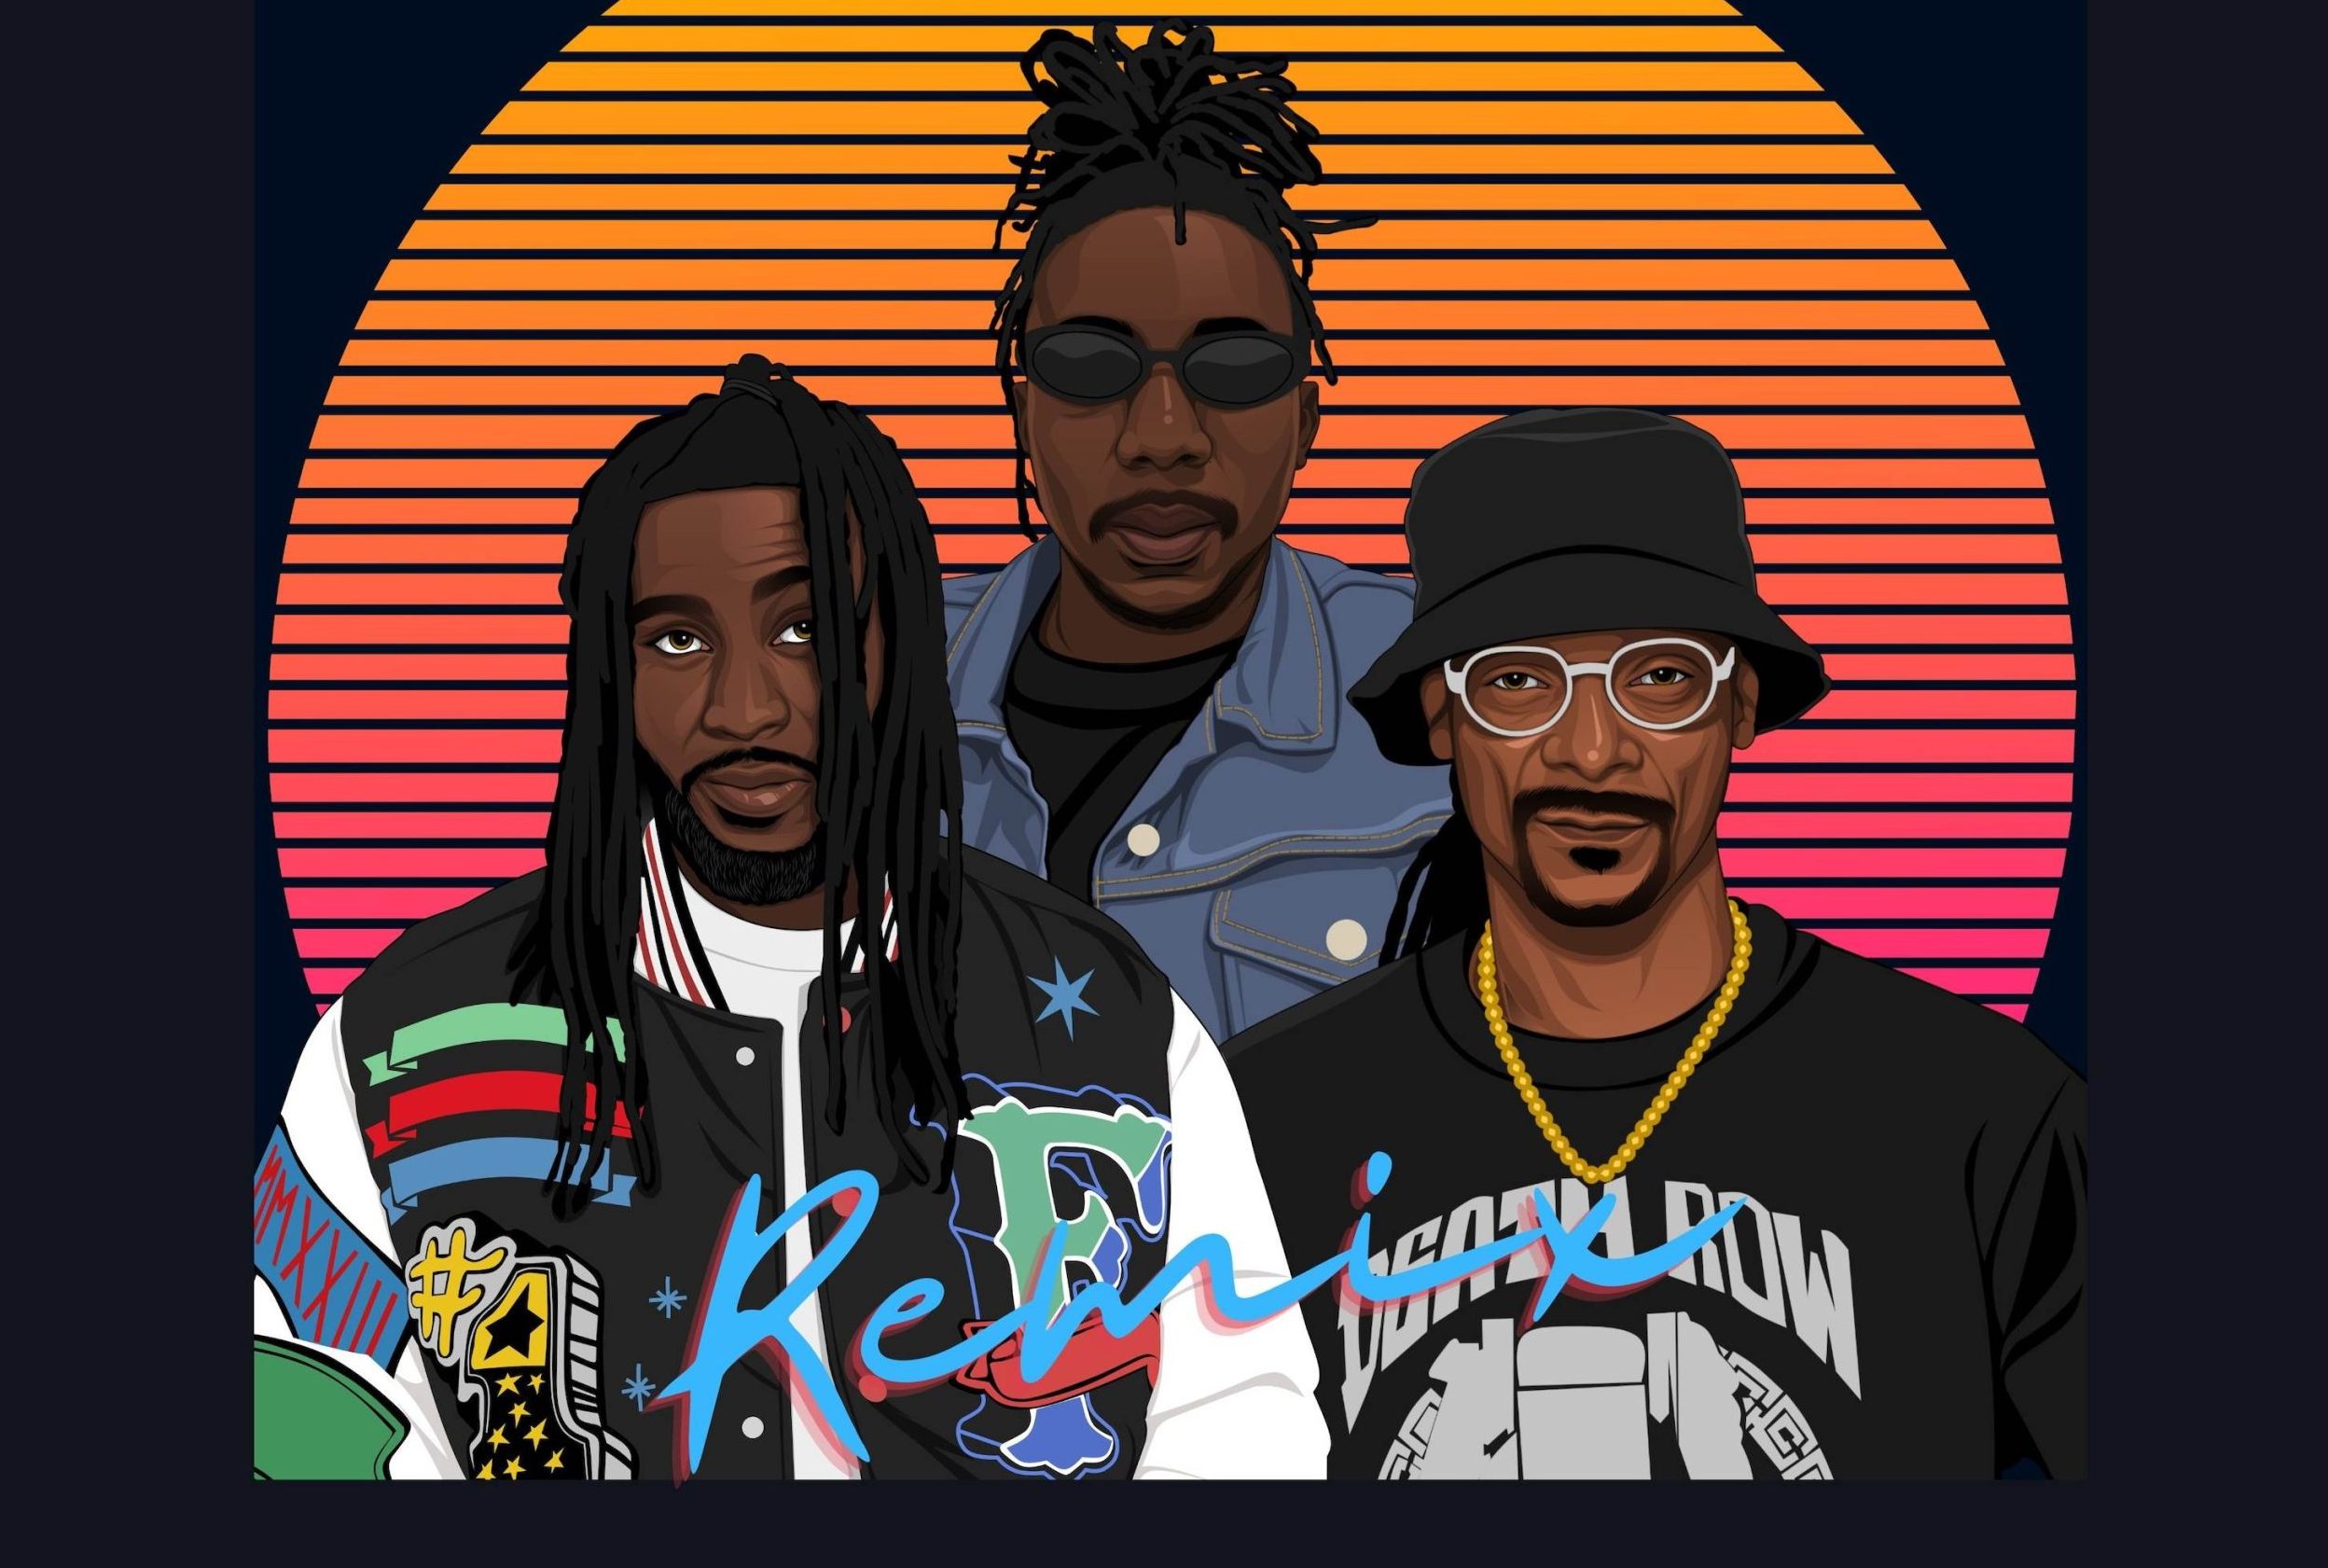 Global Fusion: Awo Ayo's 'High On Life – Remix' featuring Snoop Dogg & AwoOboyEmma Takes the World by Storm